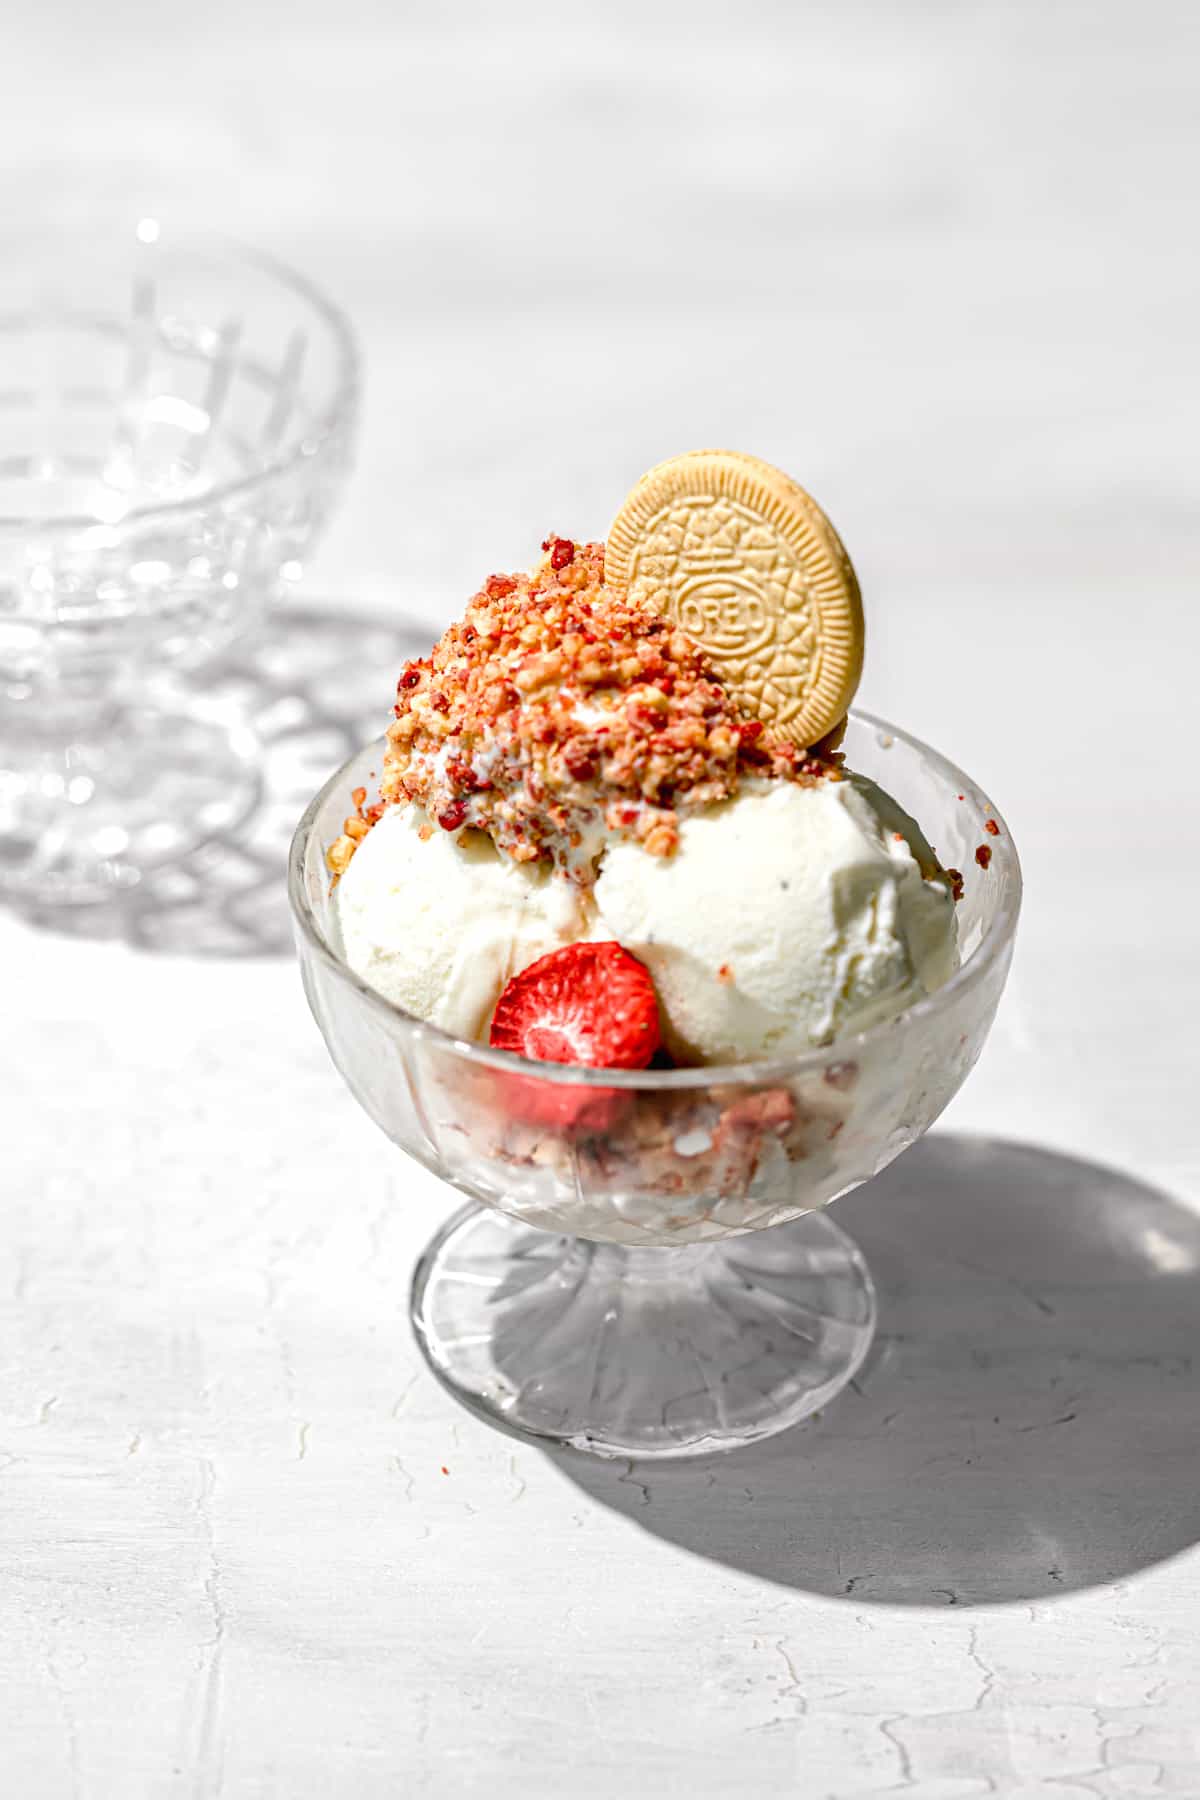 vanilla ice cream topped with strawberry shortcake crumble in glass bowl